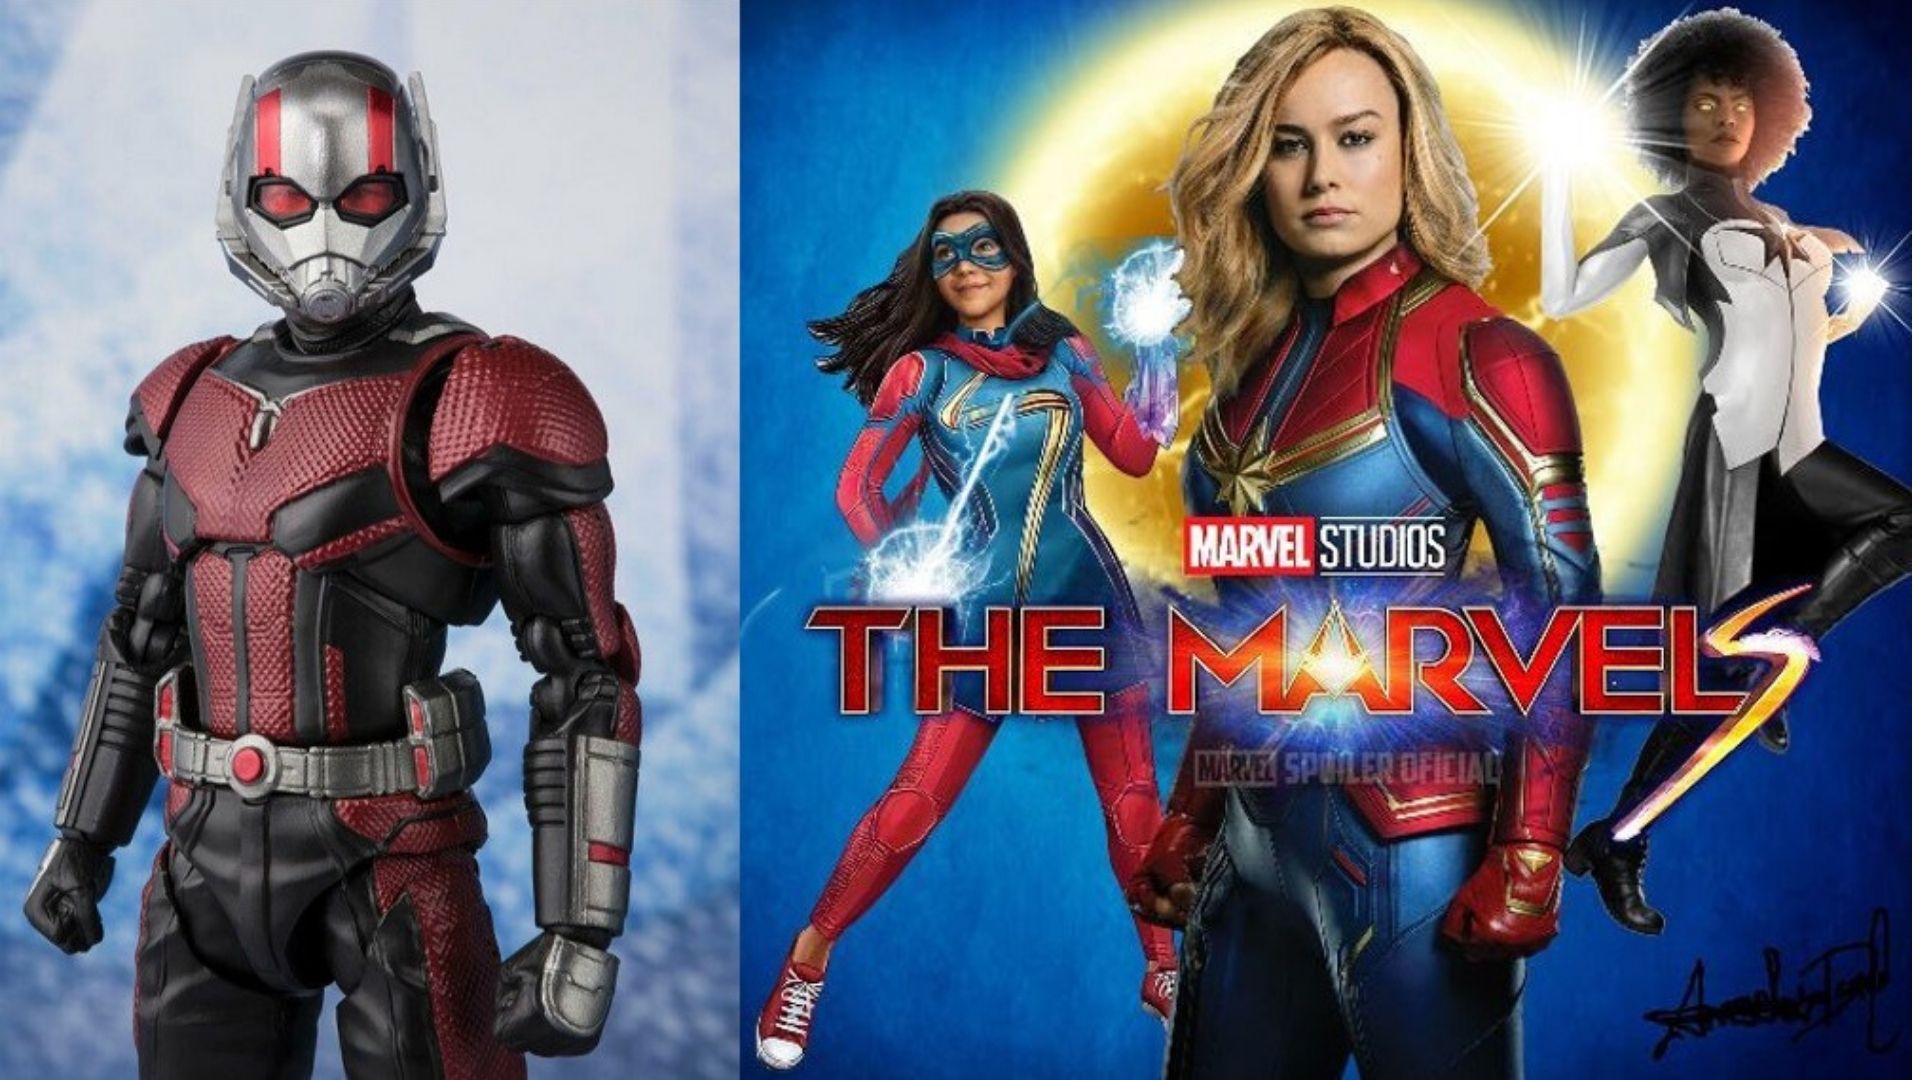 Ant-Man 3' swaps release date with 'The Marvels', set to open in